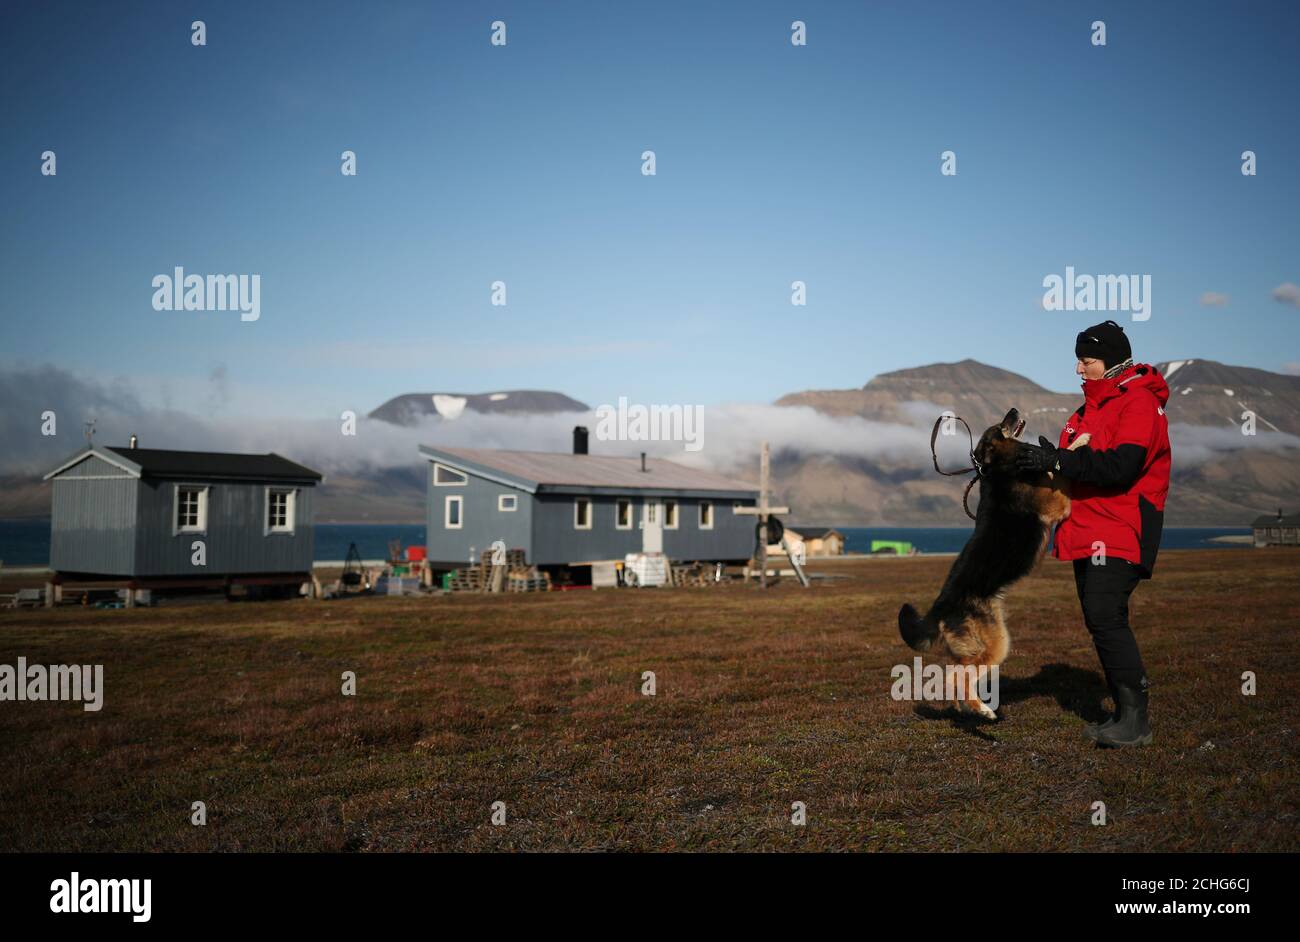 Christiane Huebner plays with her dog Svea in front of her home in the town  of Longyearbyen, in Svalbard, Norway, August 3, 2019. Three years ago, as  winter approached, 13 meters of